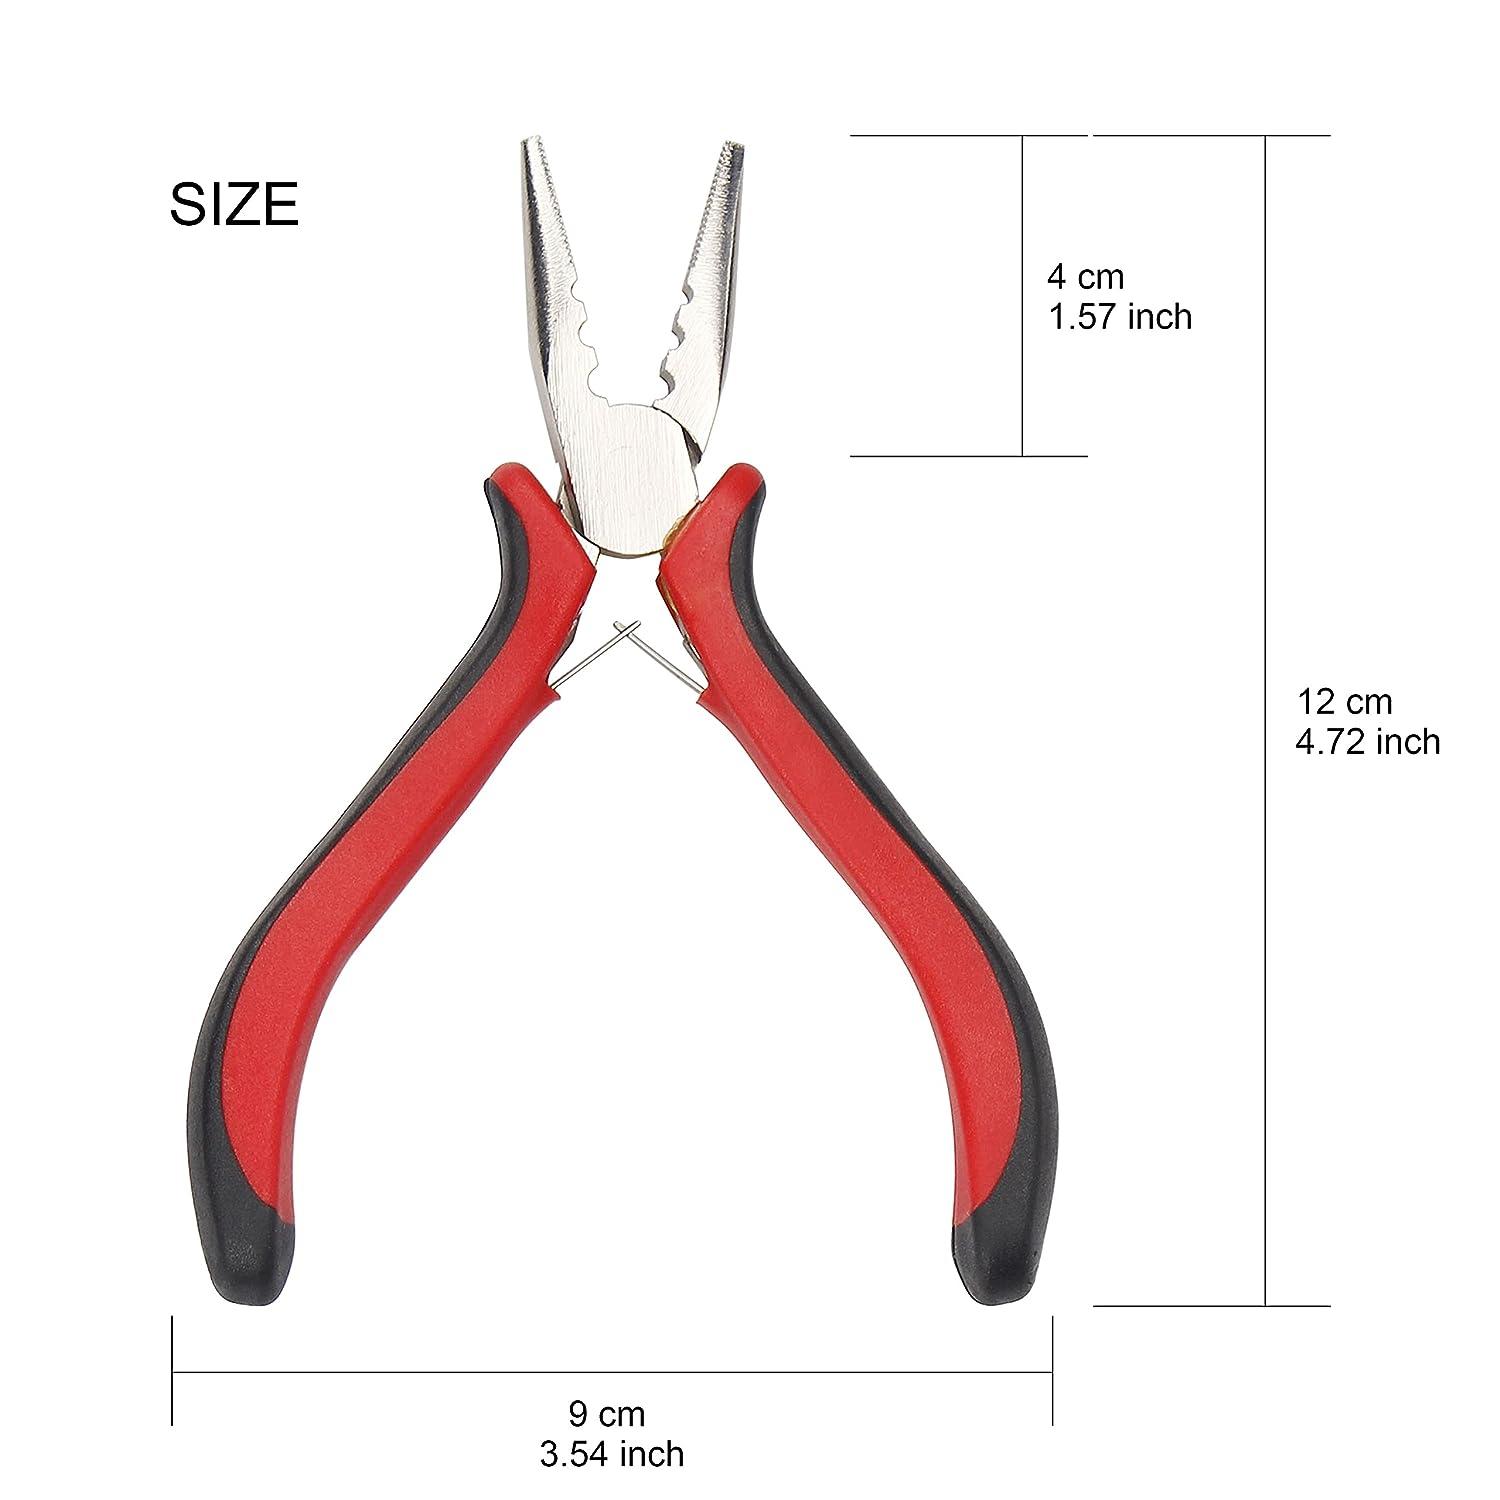 Needle Nose Pliers with 3 Holes Serrated Jaws Mini Plier for Micro Nano  Ring Hair Extensions, Jewelry Making, Bending Wire and Small Object  Gripping